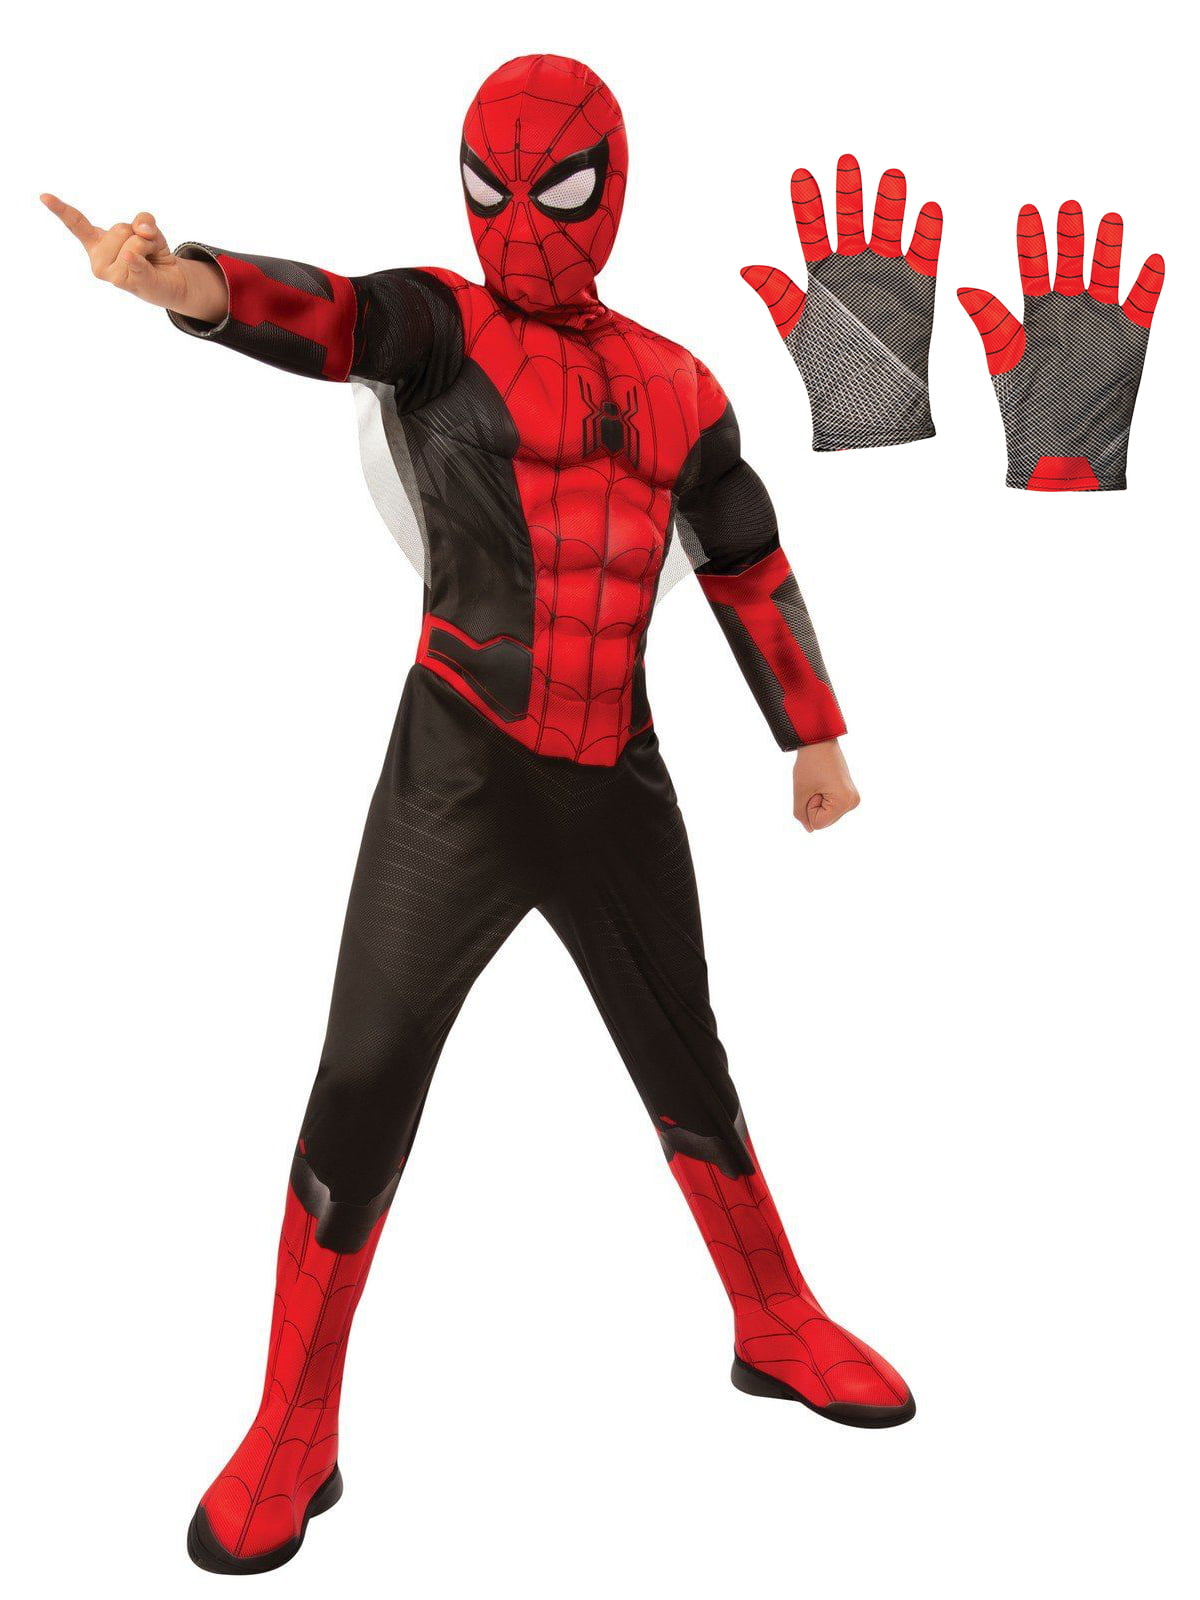 Spiderman Kids Deluxe Costume Kit - Red & Black - Size Small - Walmart ...